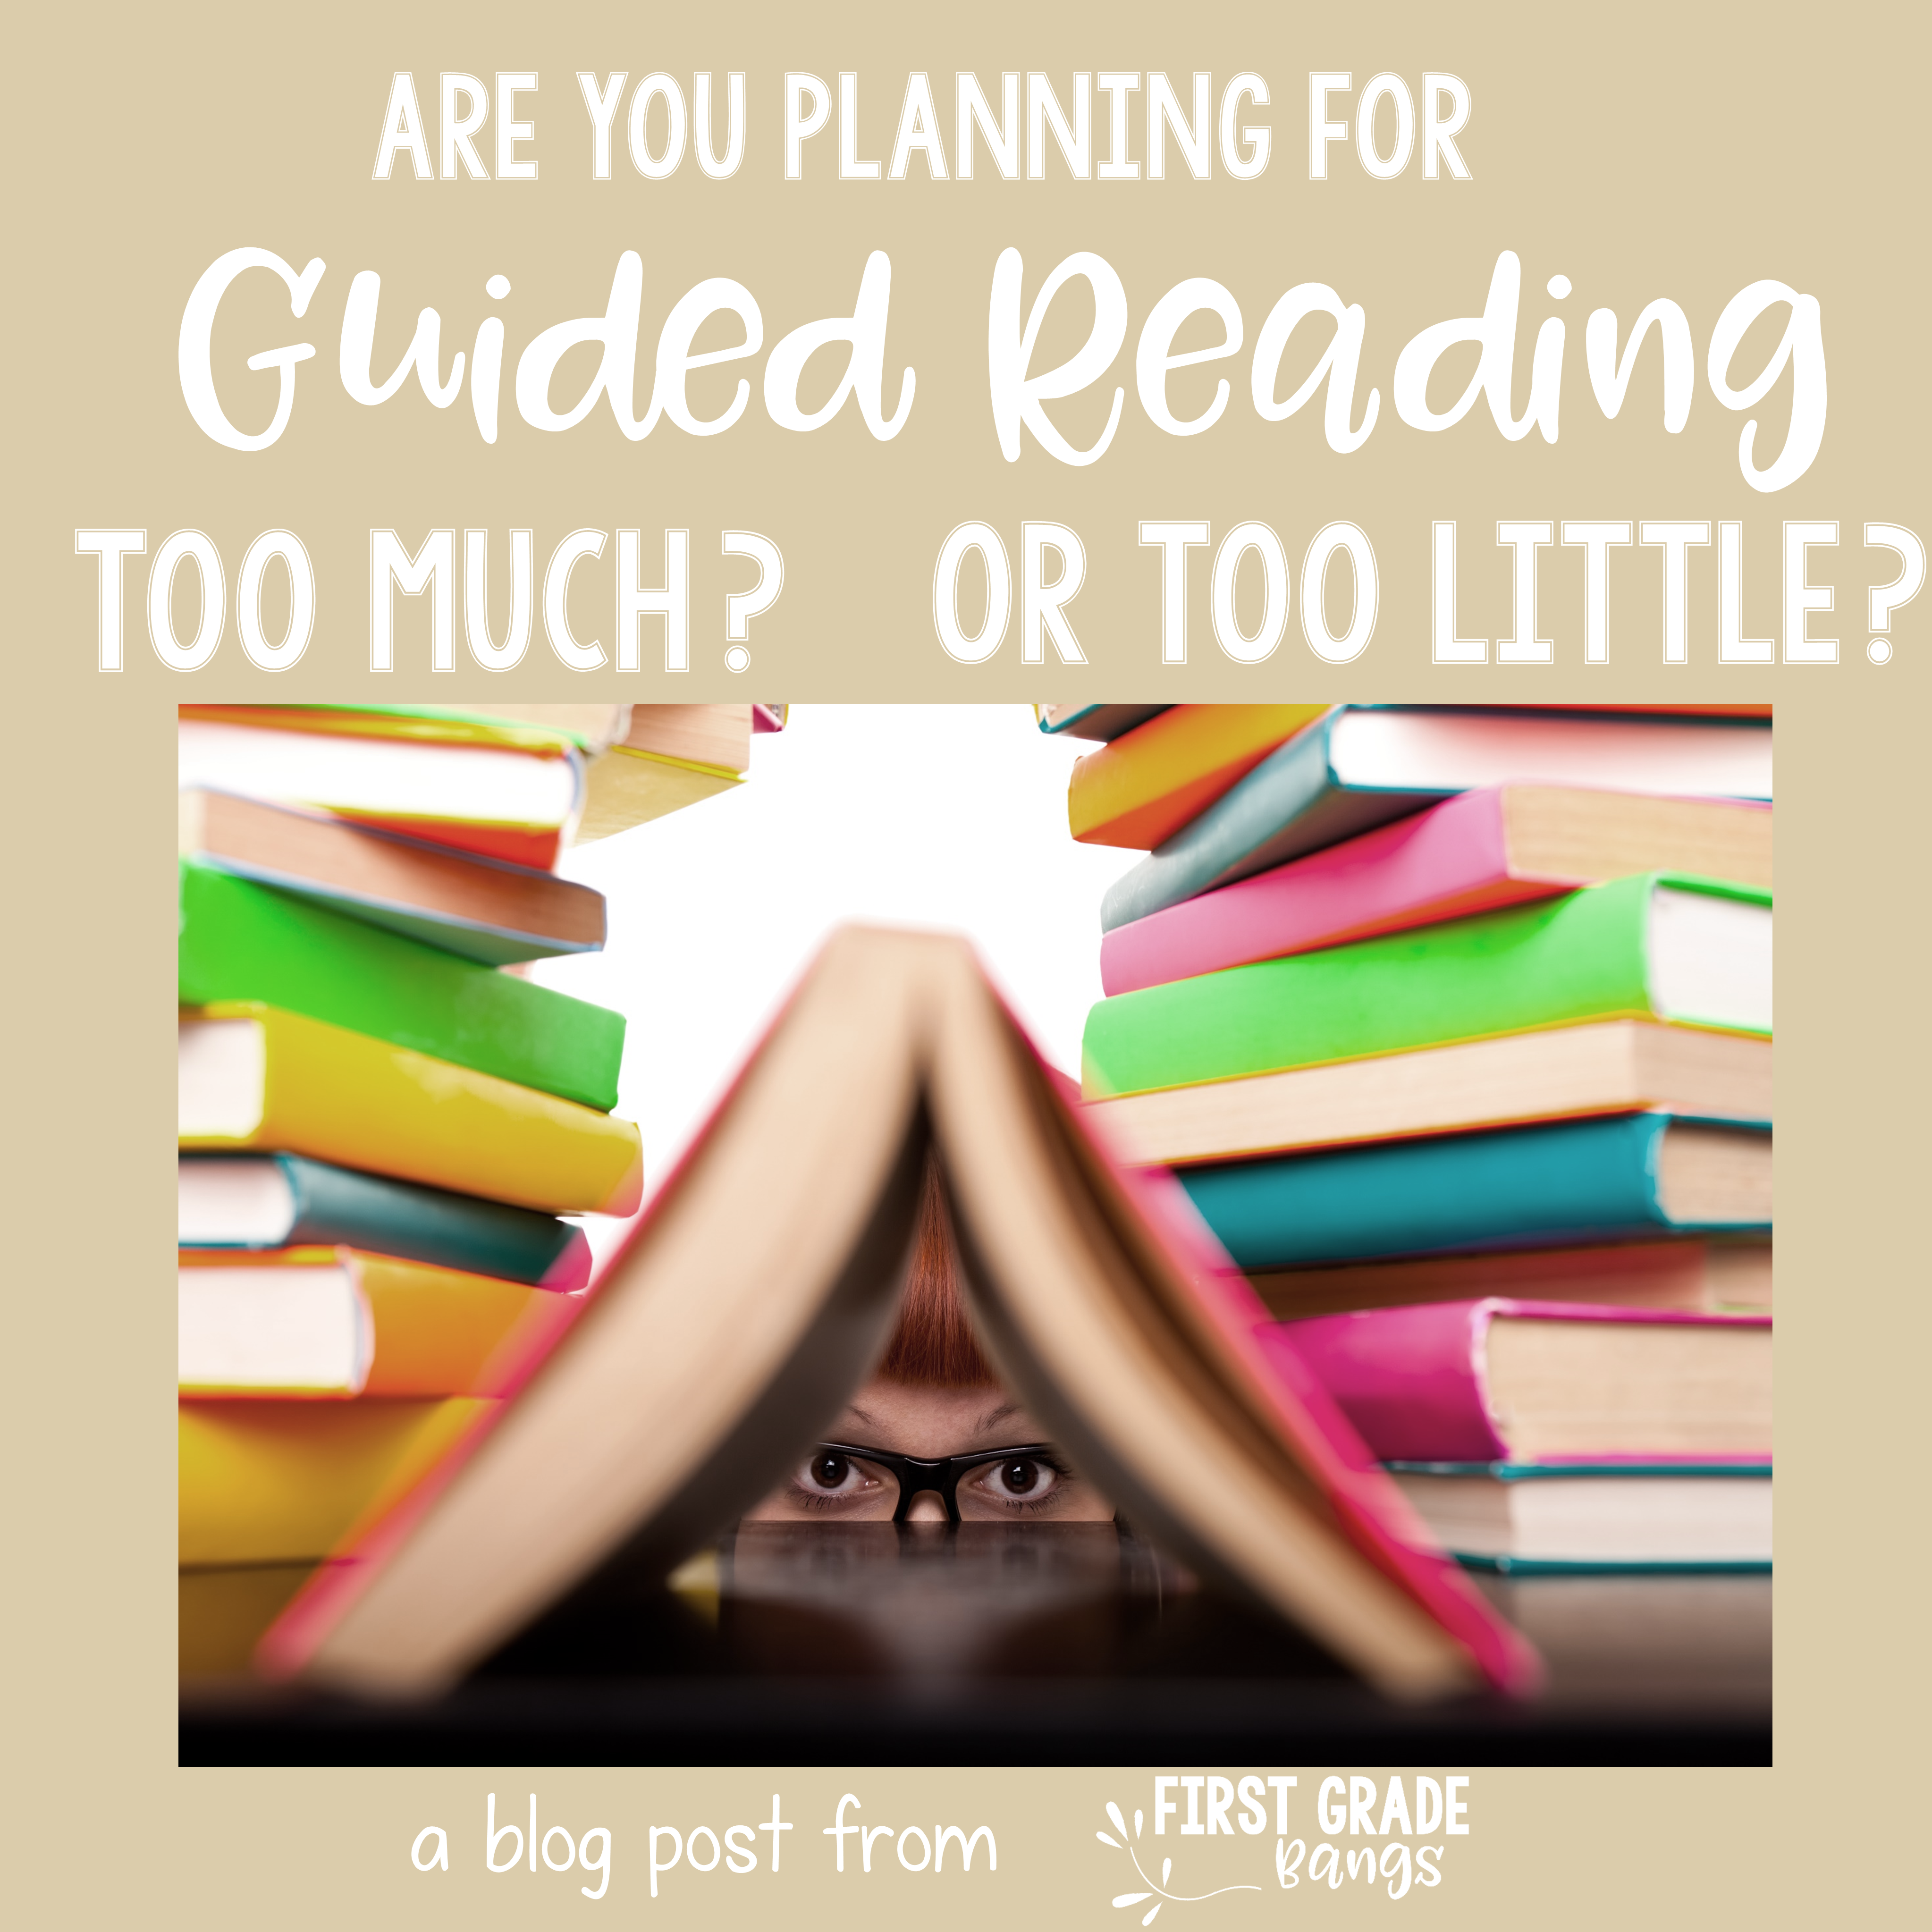 Guided Reading- Are you planning TOO MUCH or TOO LITTLE?